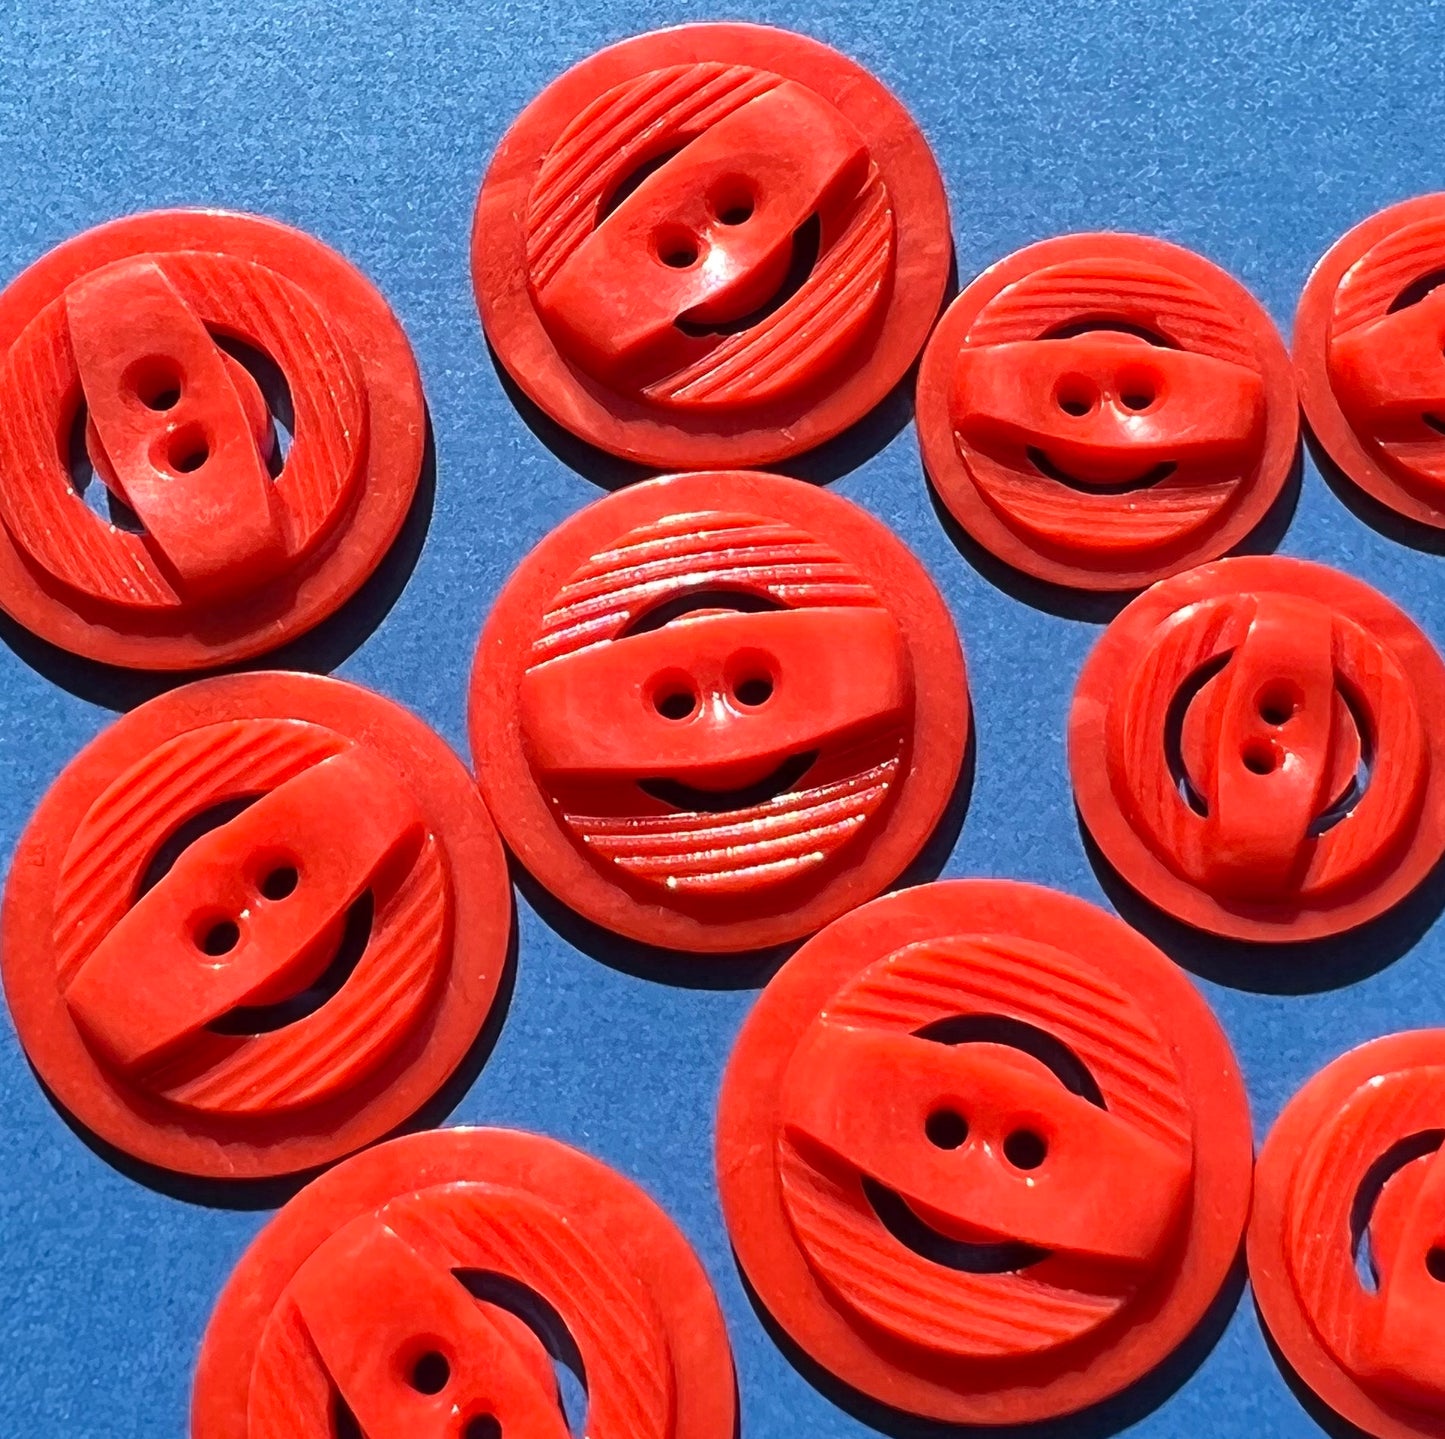 6 Very Deco Red 1940s  Buttons - 2.2cm